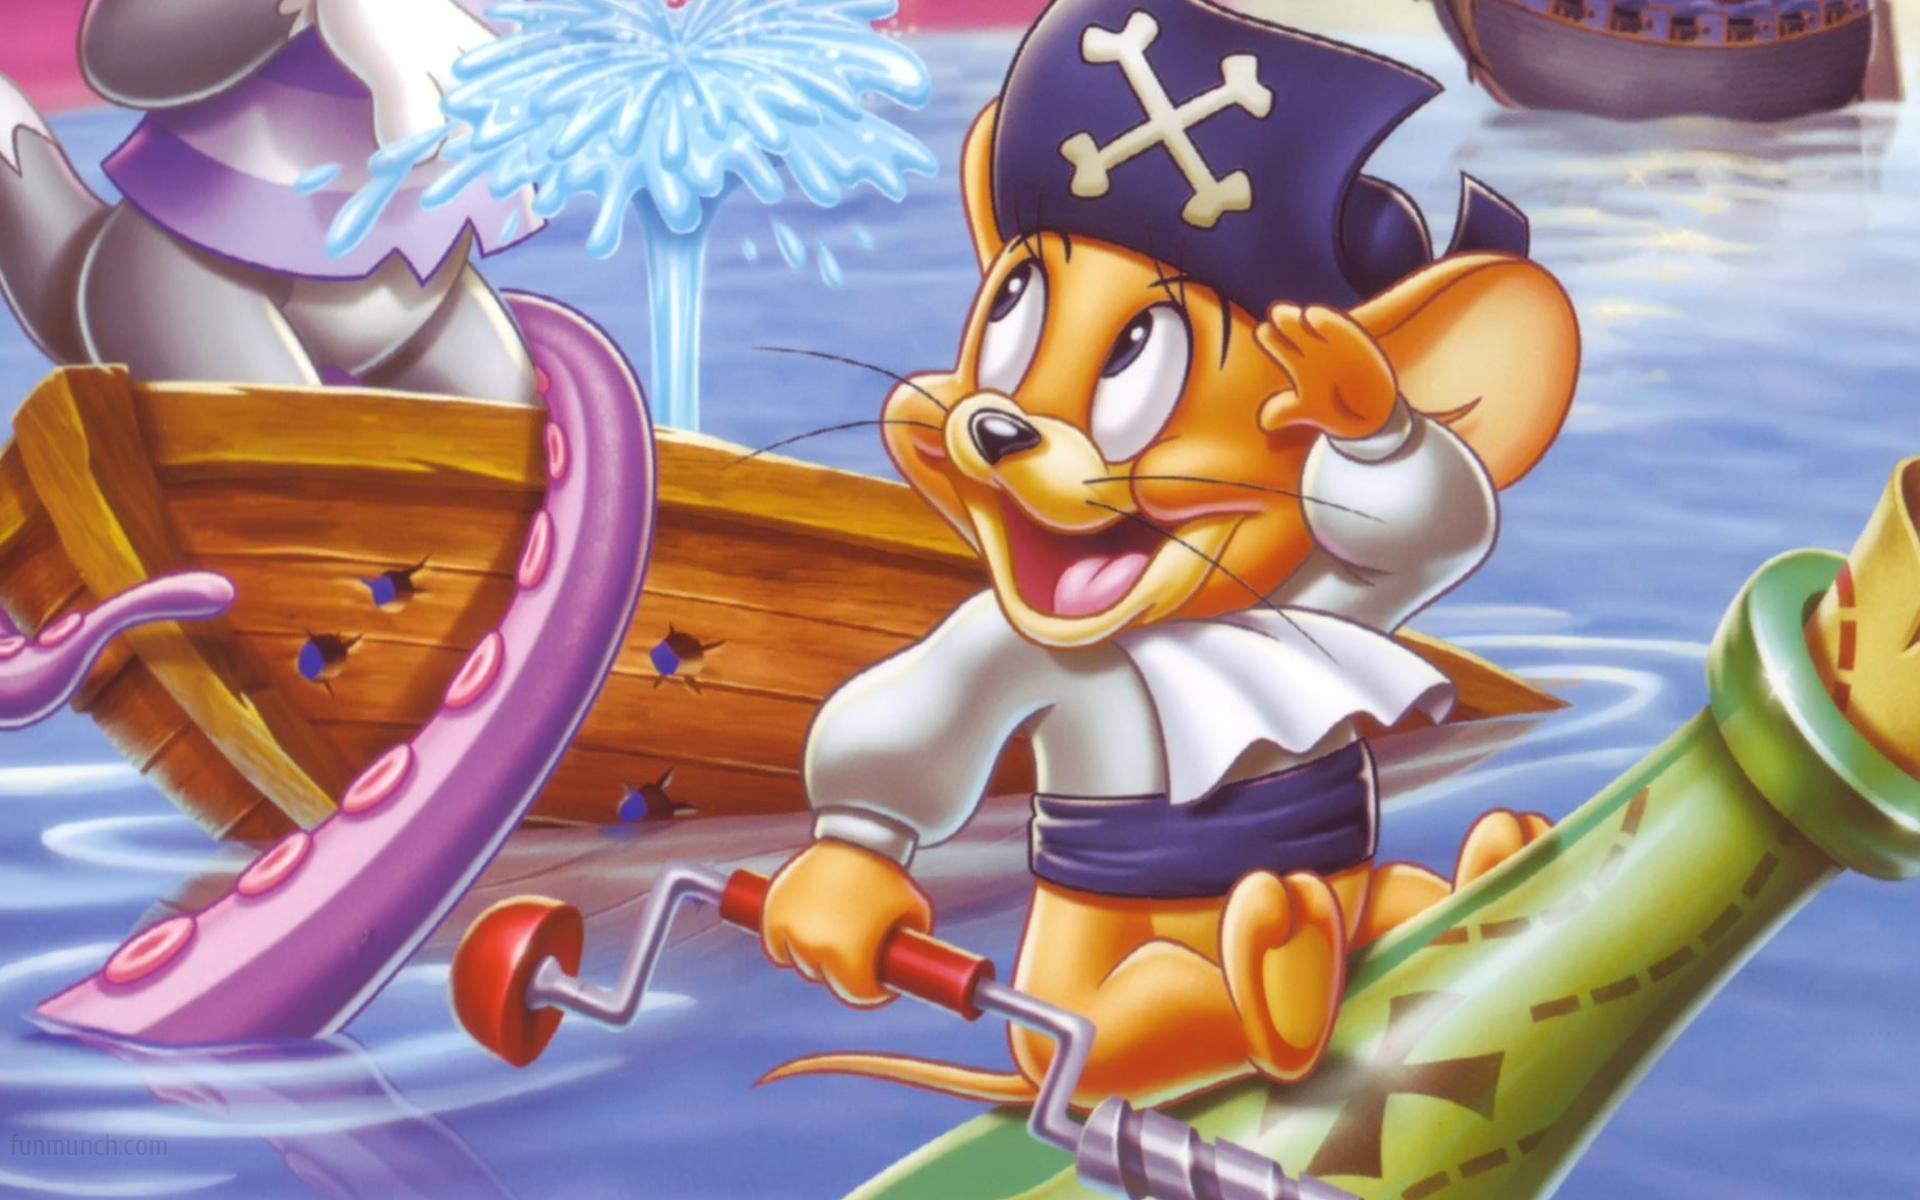 Tom jerry cartoon free download - lanaofficial